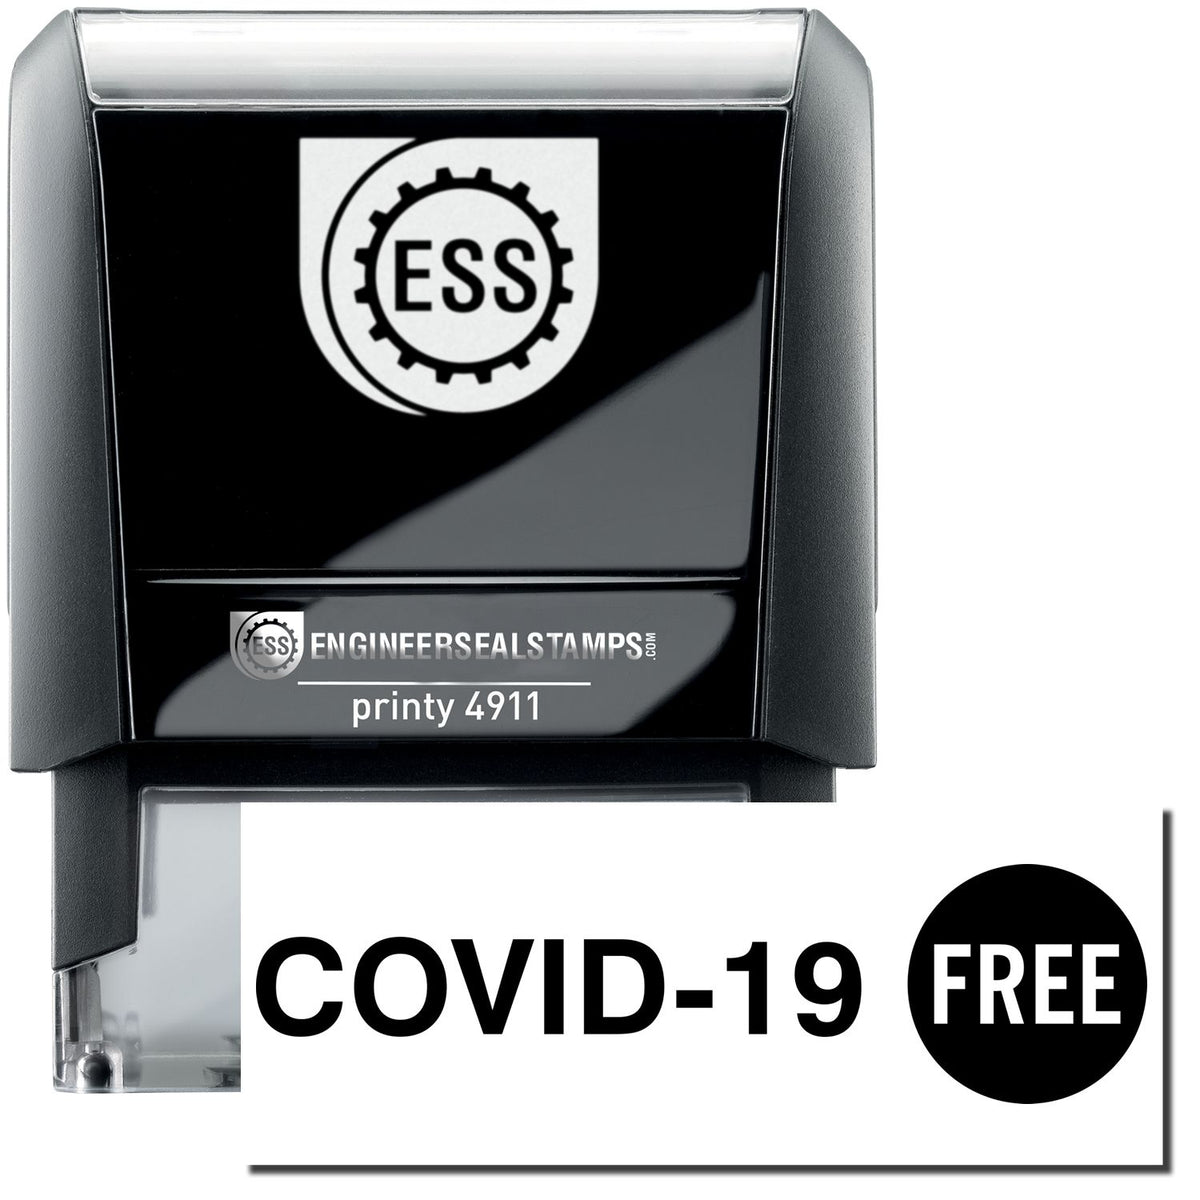 A self-inking stamp with a stamped image showing how the text &quot;COVID-19&quot; with a &quot;FREE&quot; signboard on the right is displayed after stamping.